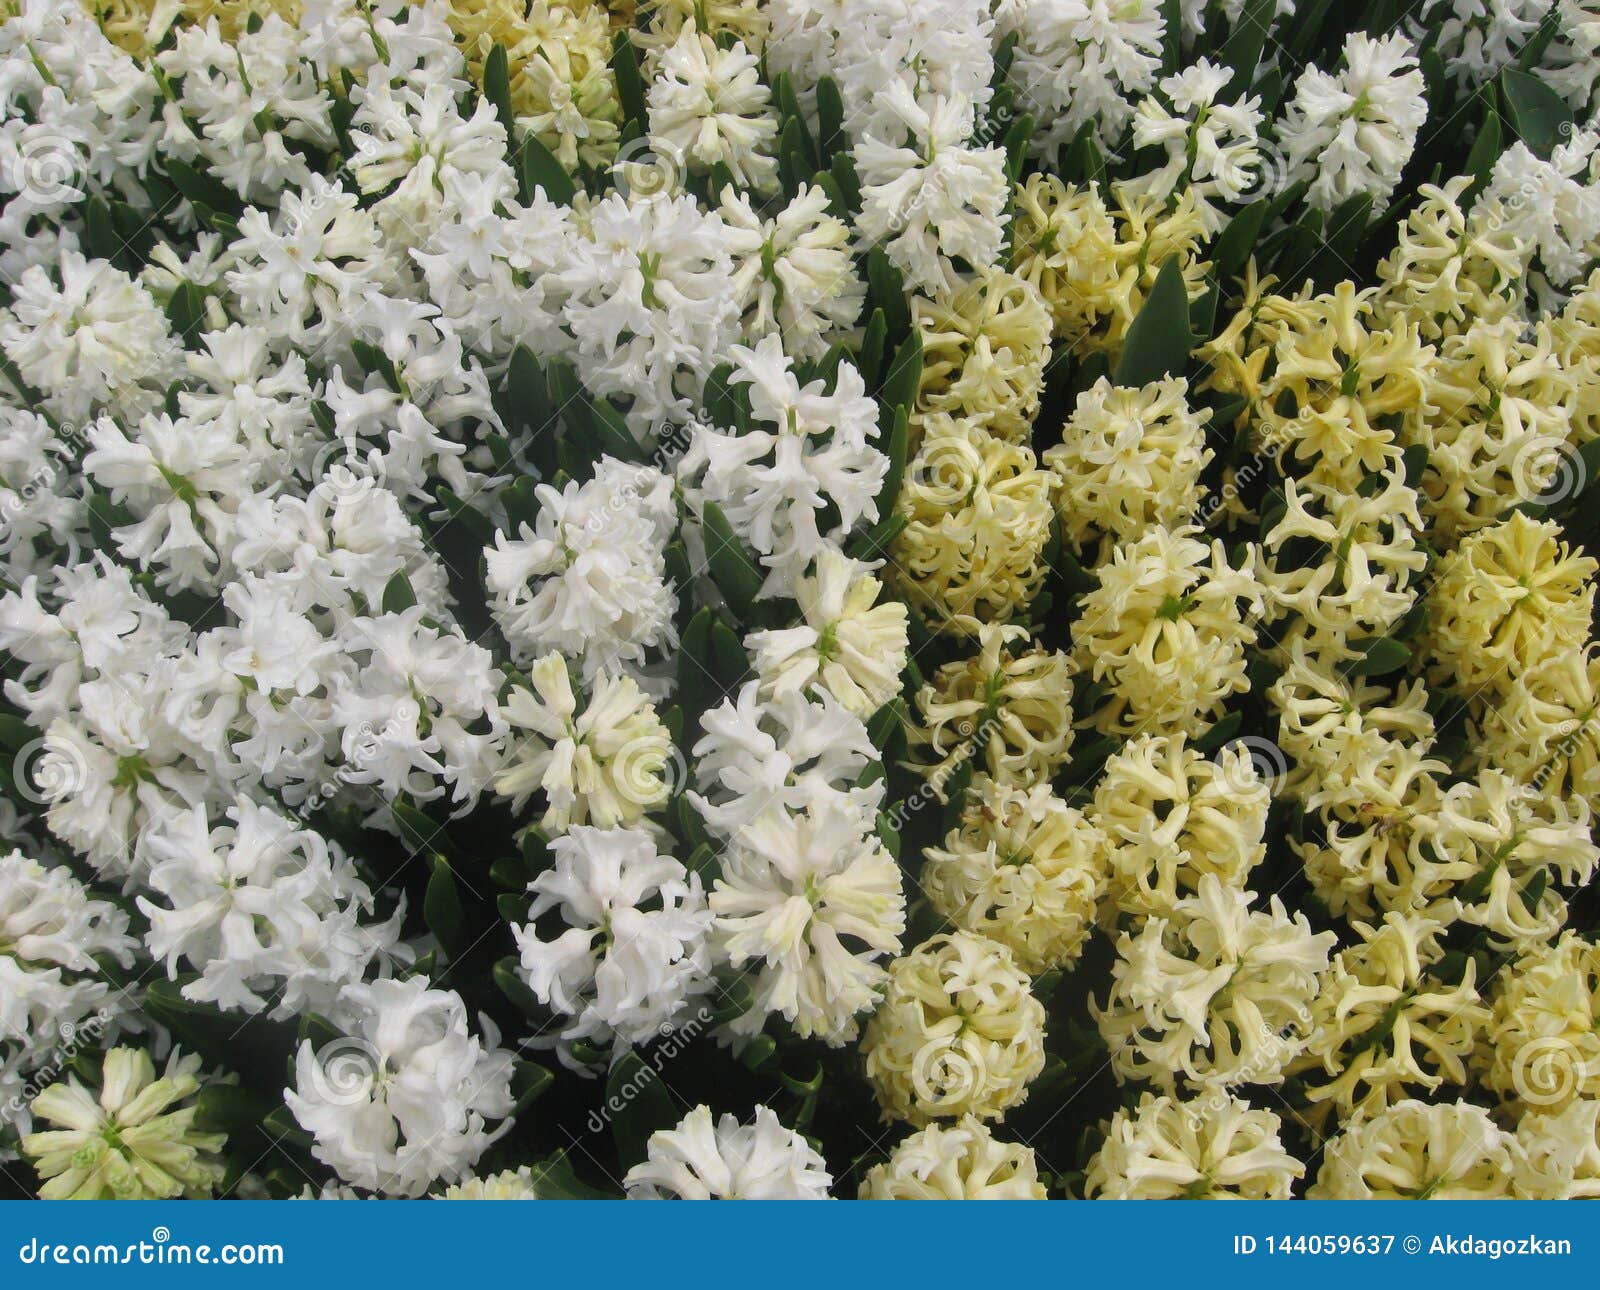 White And Yellow Dutch Hyacinth Hyacinth Blossom From Top View In Spring Stock Image Image Of Beauty Gardening 144059637